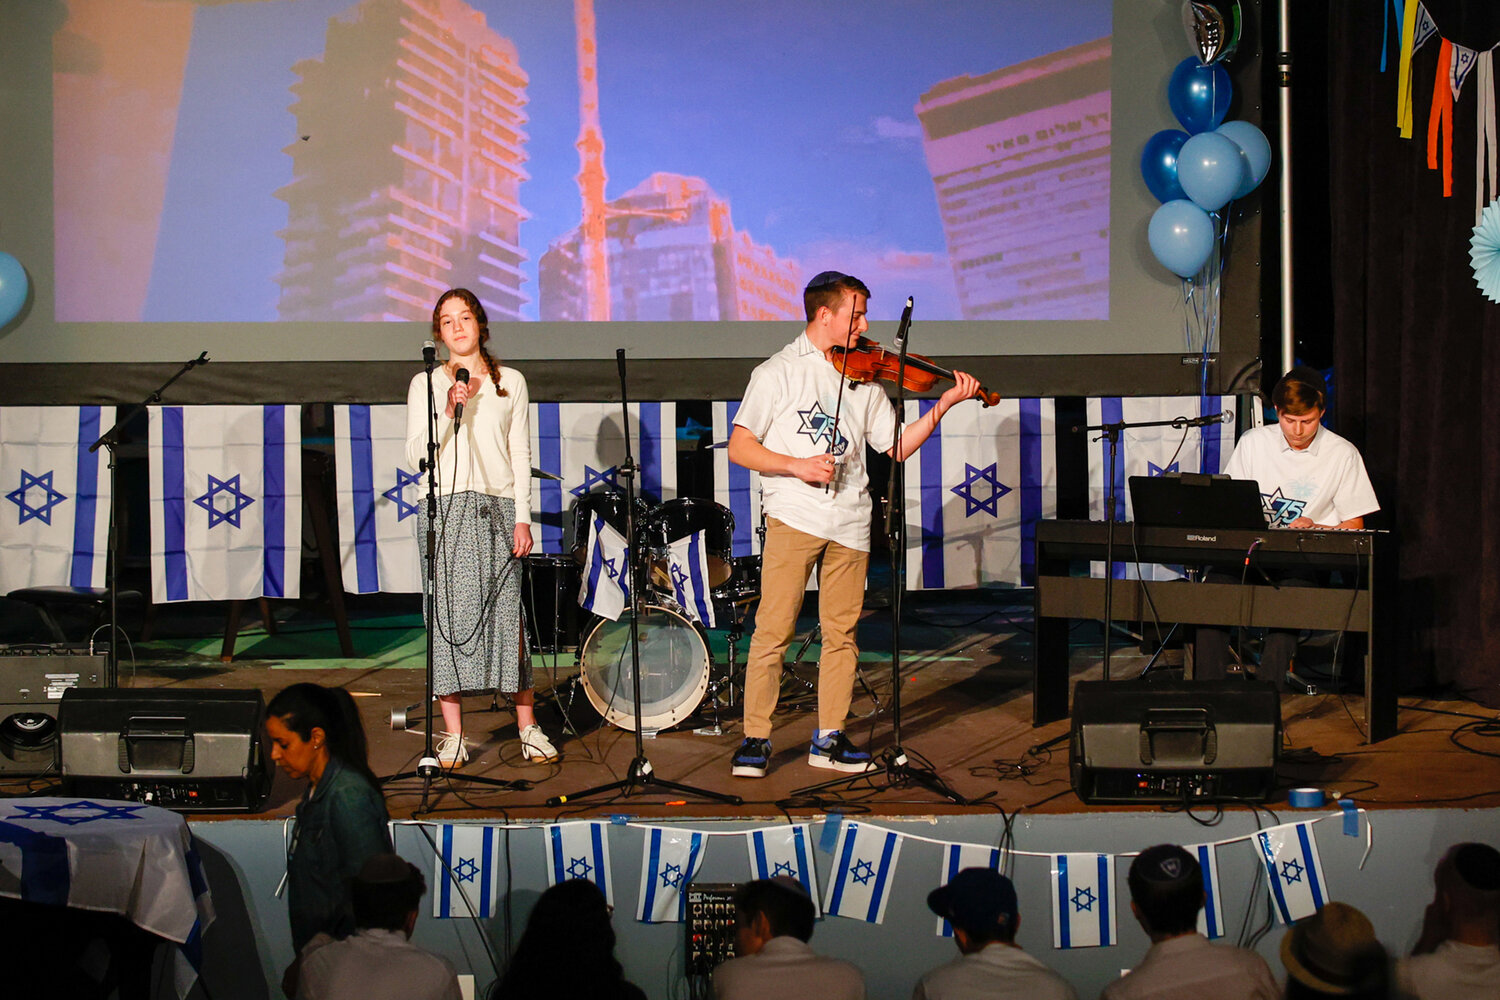 SAR High School held a fierce Kochav Nolad — Israeli television show based on the British version of American Idol — competition that showcased their students many musical talents. Afterwards, students and faculty headed for an afternoon field trip and Israeli lunch.